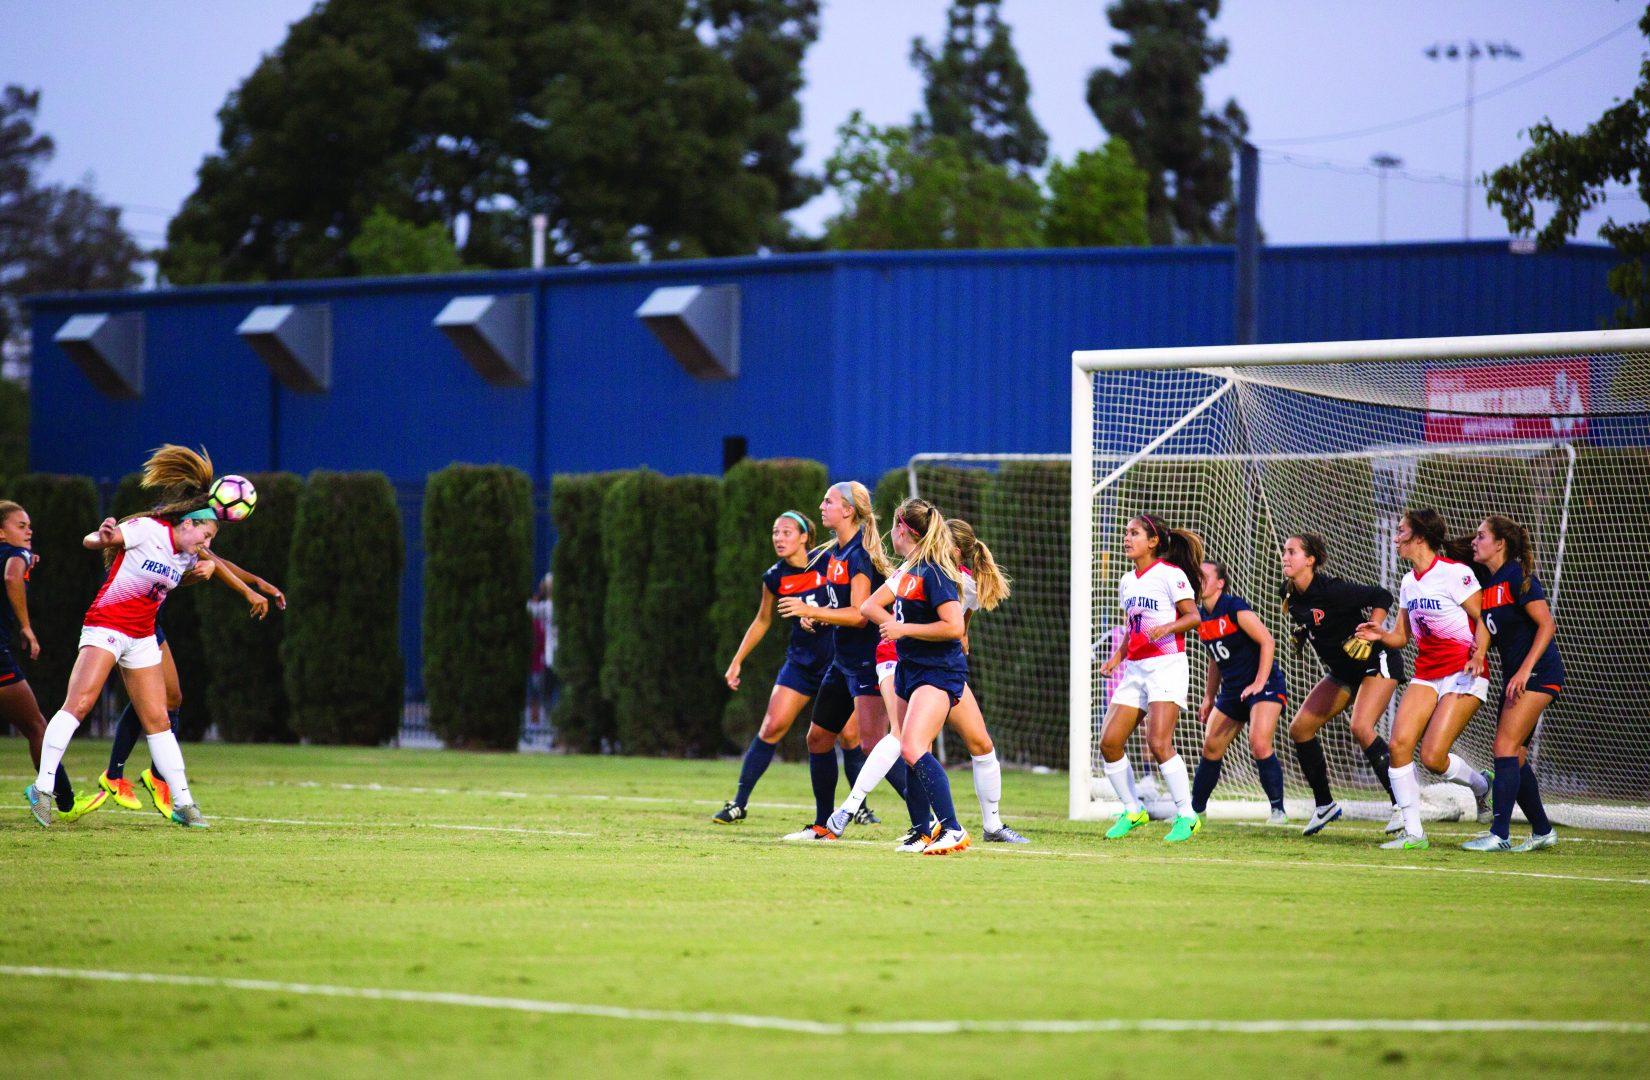 No. 12 Alyssa Holsworth attempts to score a header against Pepperdine on Friday, Aug. 26, 2016. (Christian Ortuno/The Collegian)